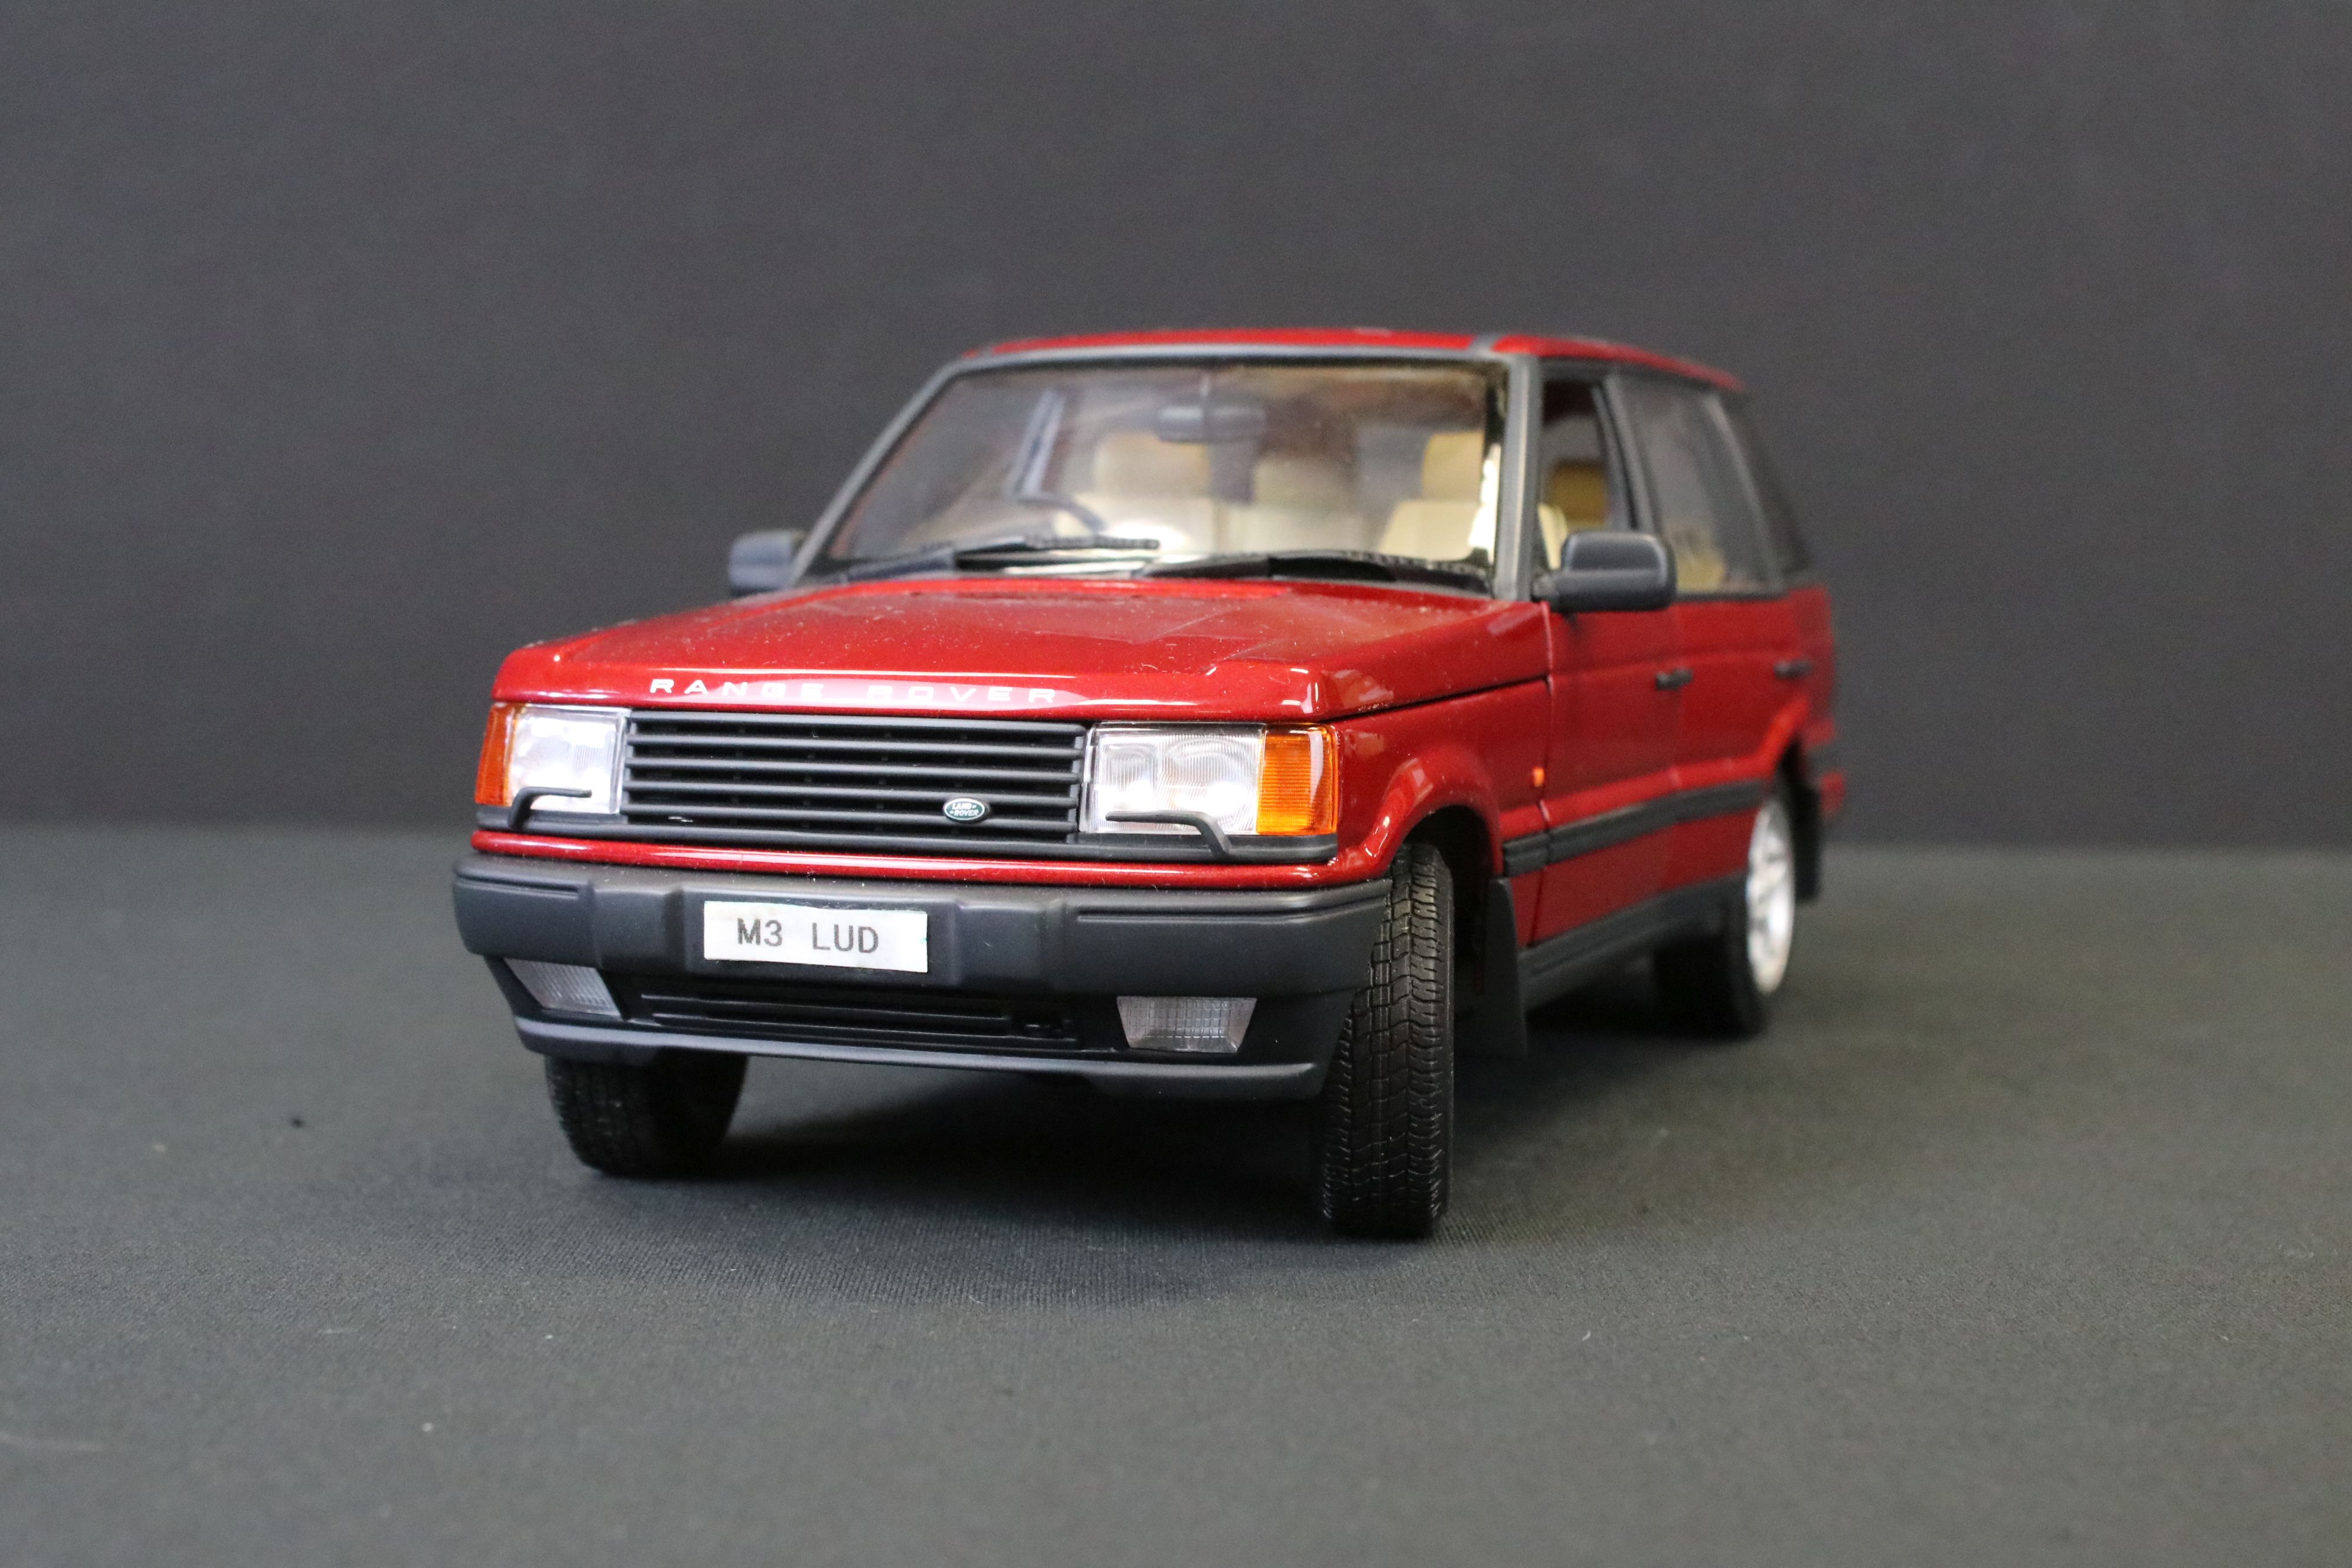 11 1/18 Scale diecast models to include 6 x AUTOart, 3 x Sun Star, Paul's Model Art Minichamps and - Image 6 of 47